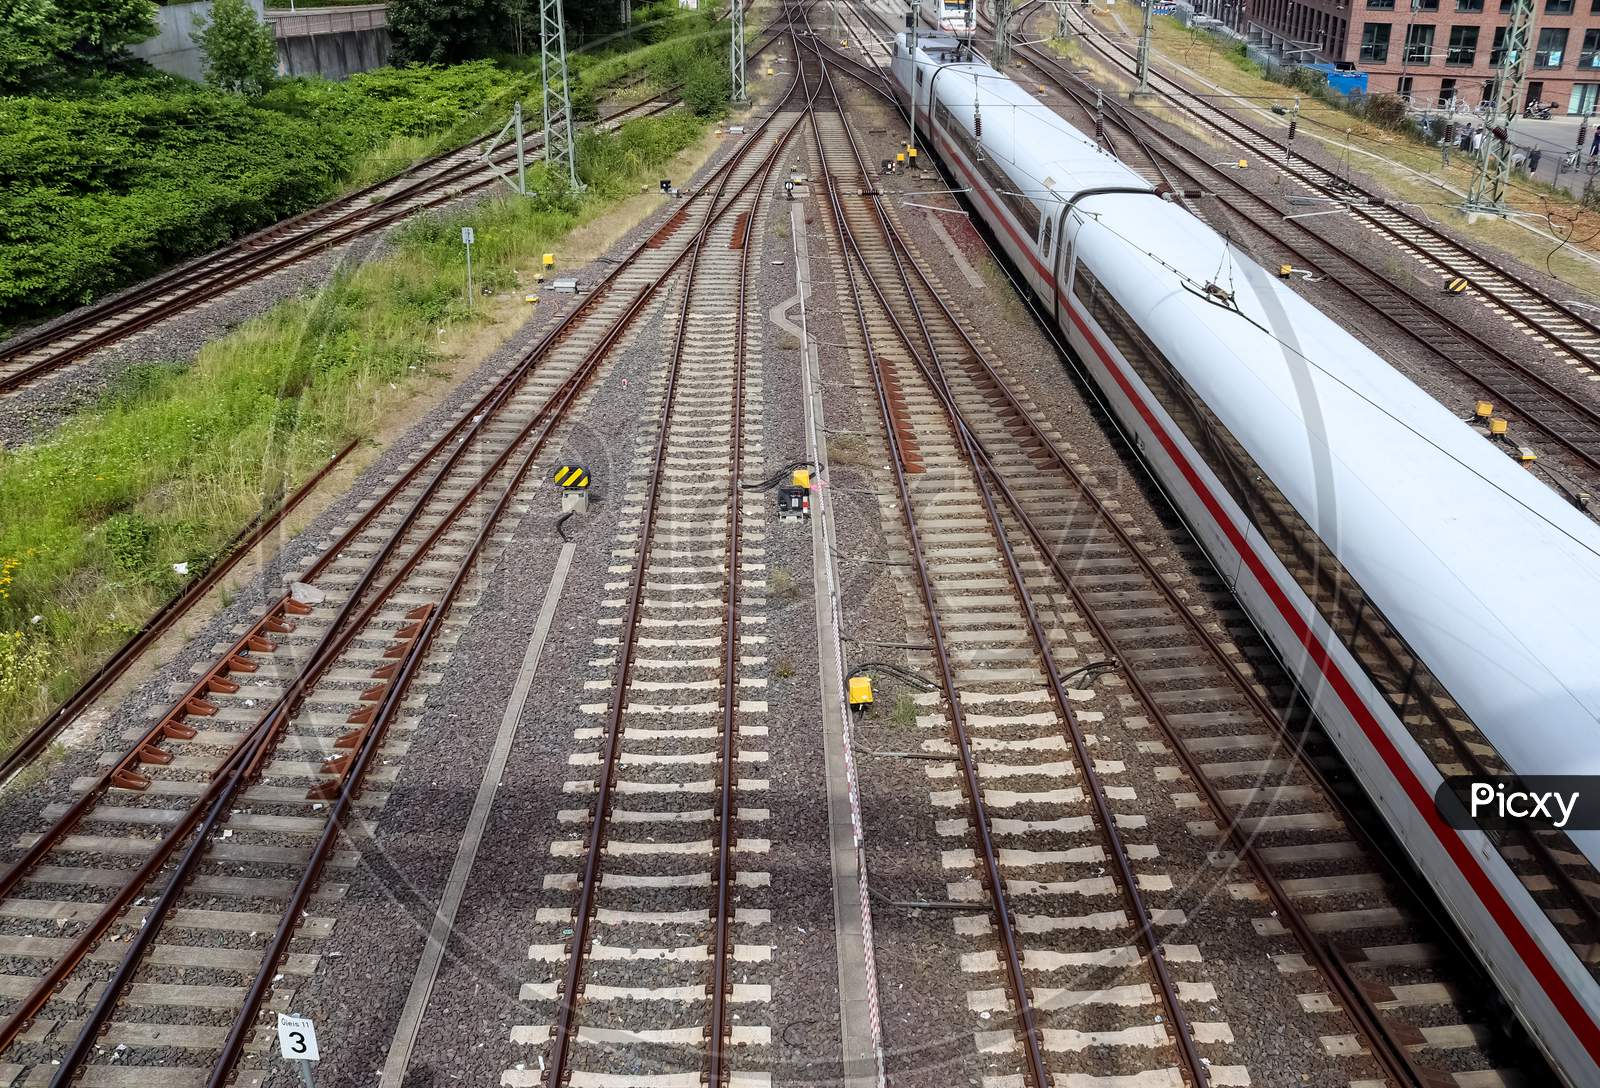 Multiple Railroad Tracks With Junctions At A Railway Station In A Perspective And Birds View